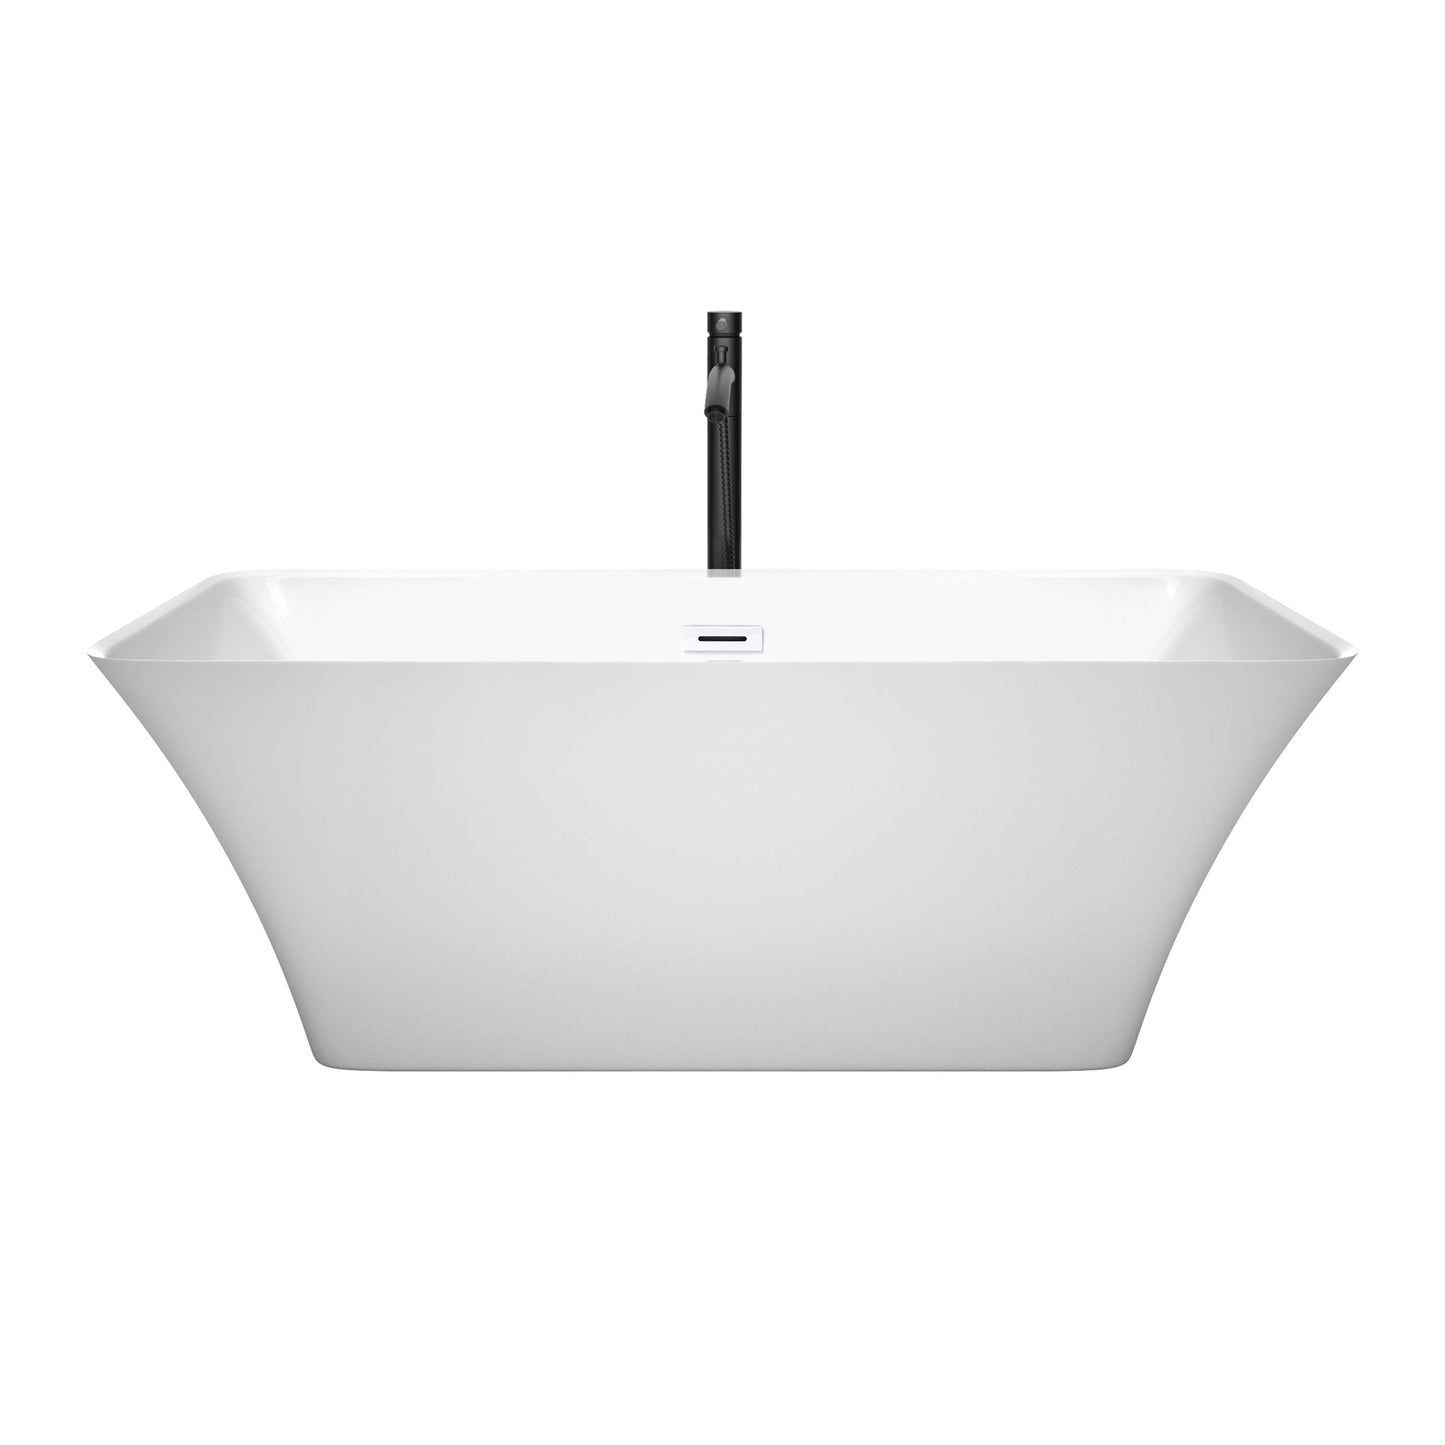 Wyndham Collection Tiffany 59" Freestanding Bathtub in White With Shiny White Trim and Floor Mounted Faucet in Matte Black